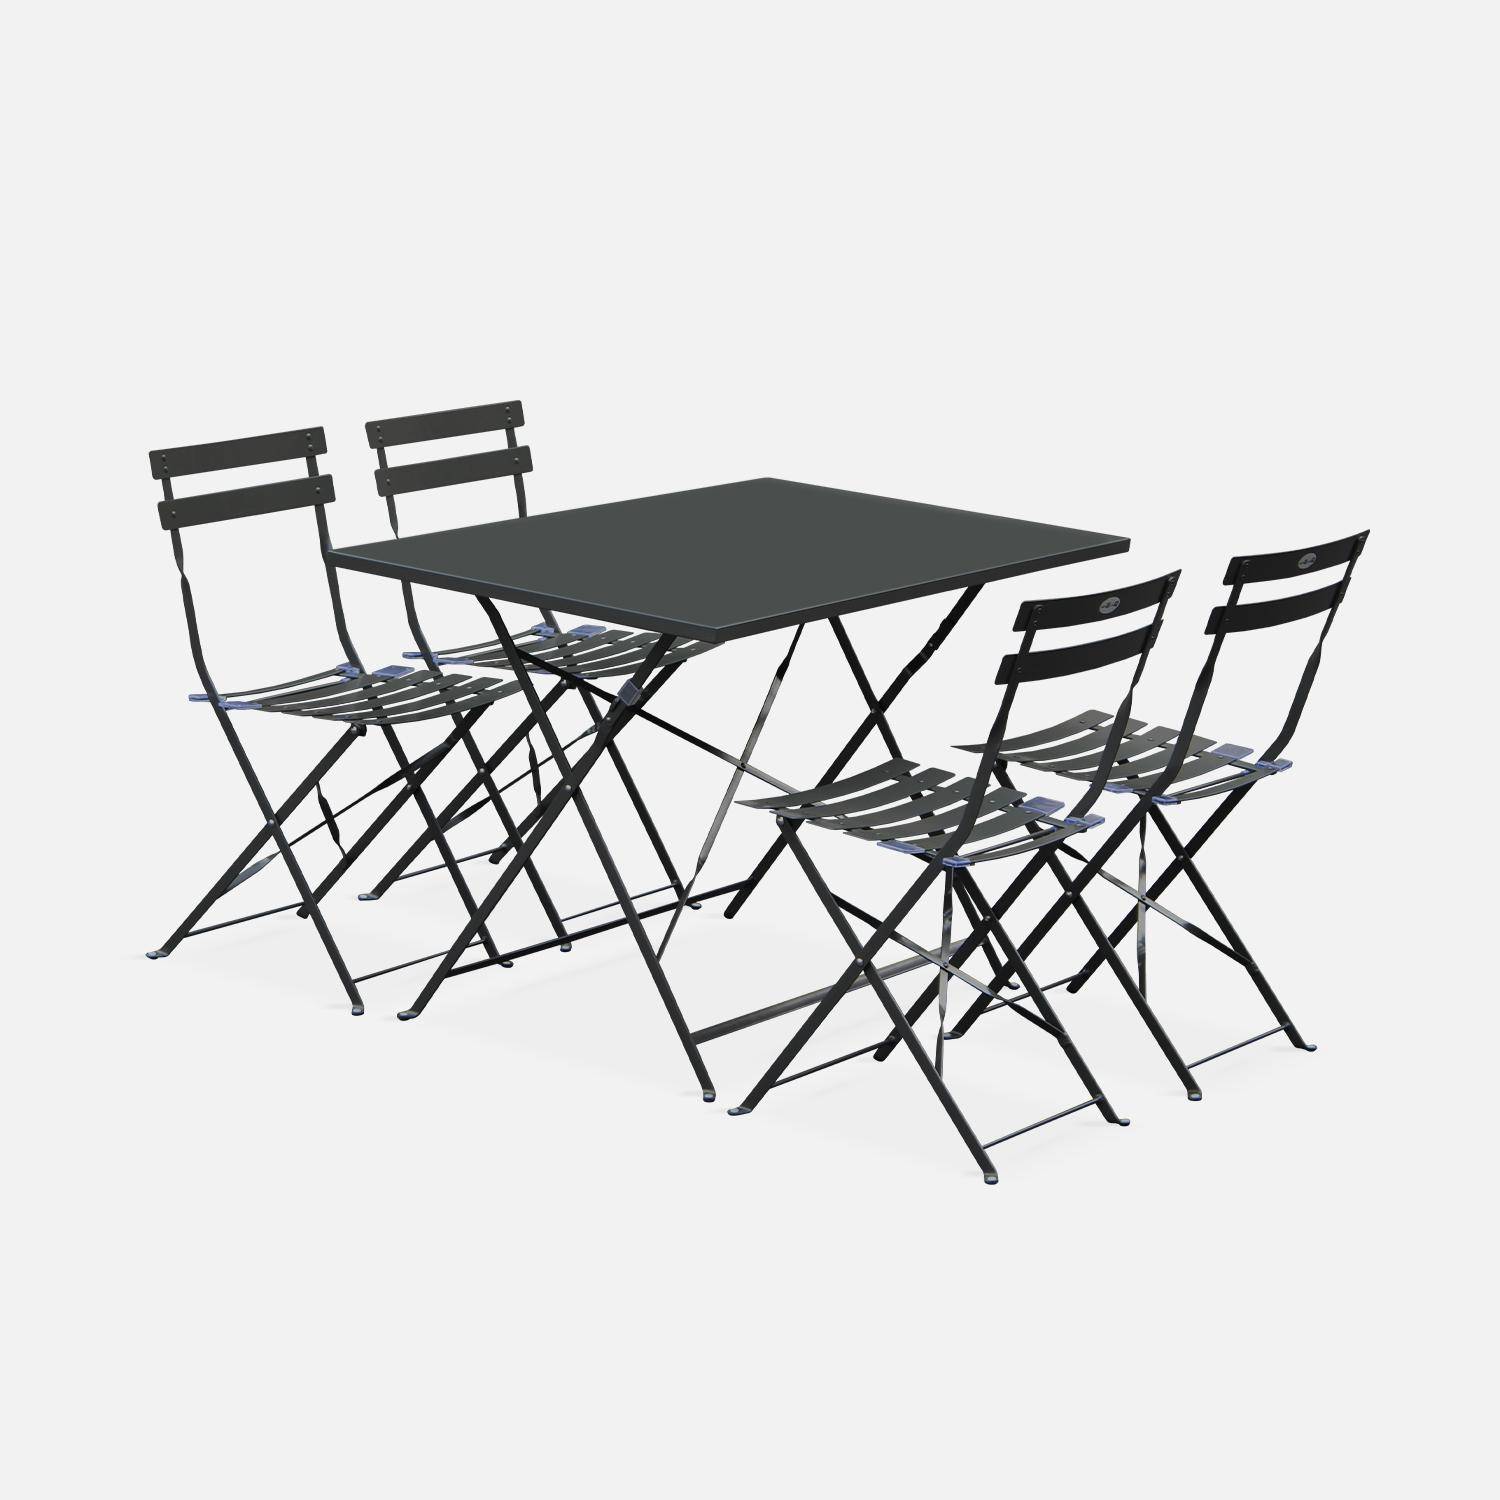 4-seater foldable thermo-lacquered steel bistro garden table with chairs, 110x70cm - Emilia - Anthracite Photo2